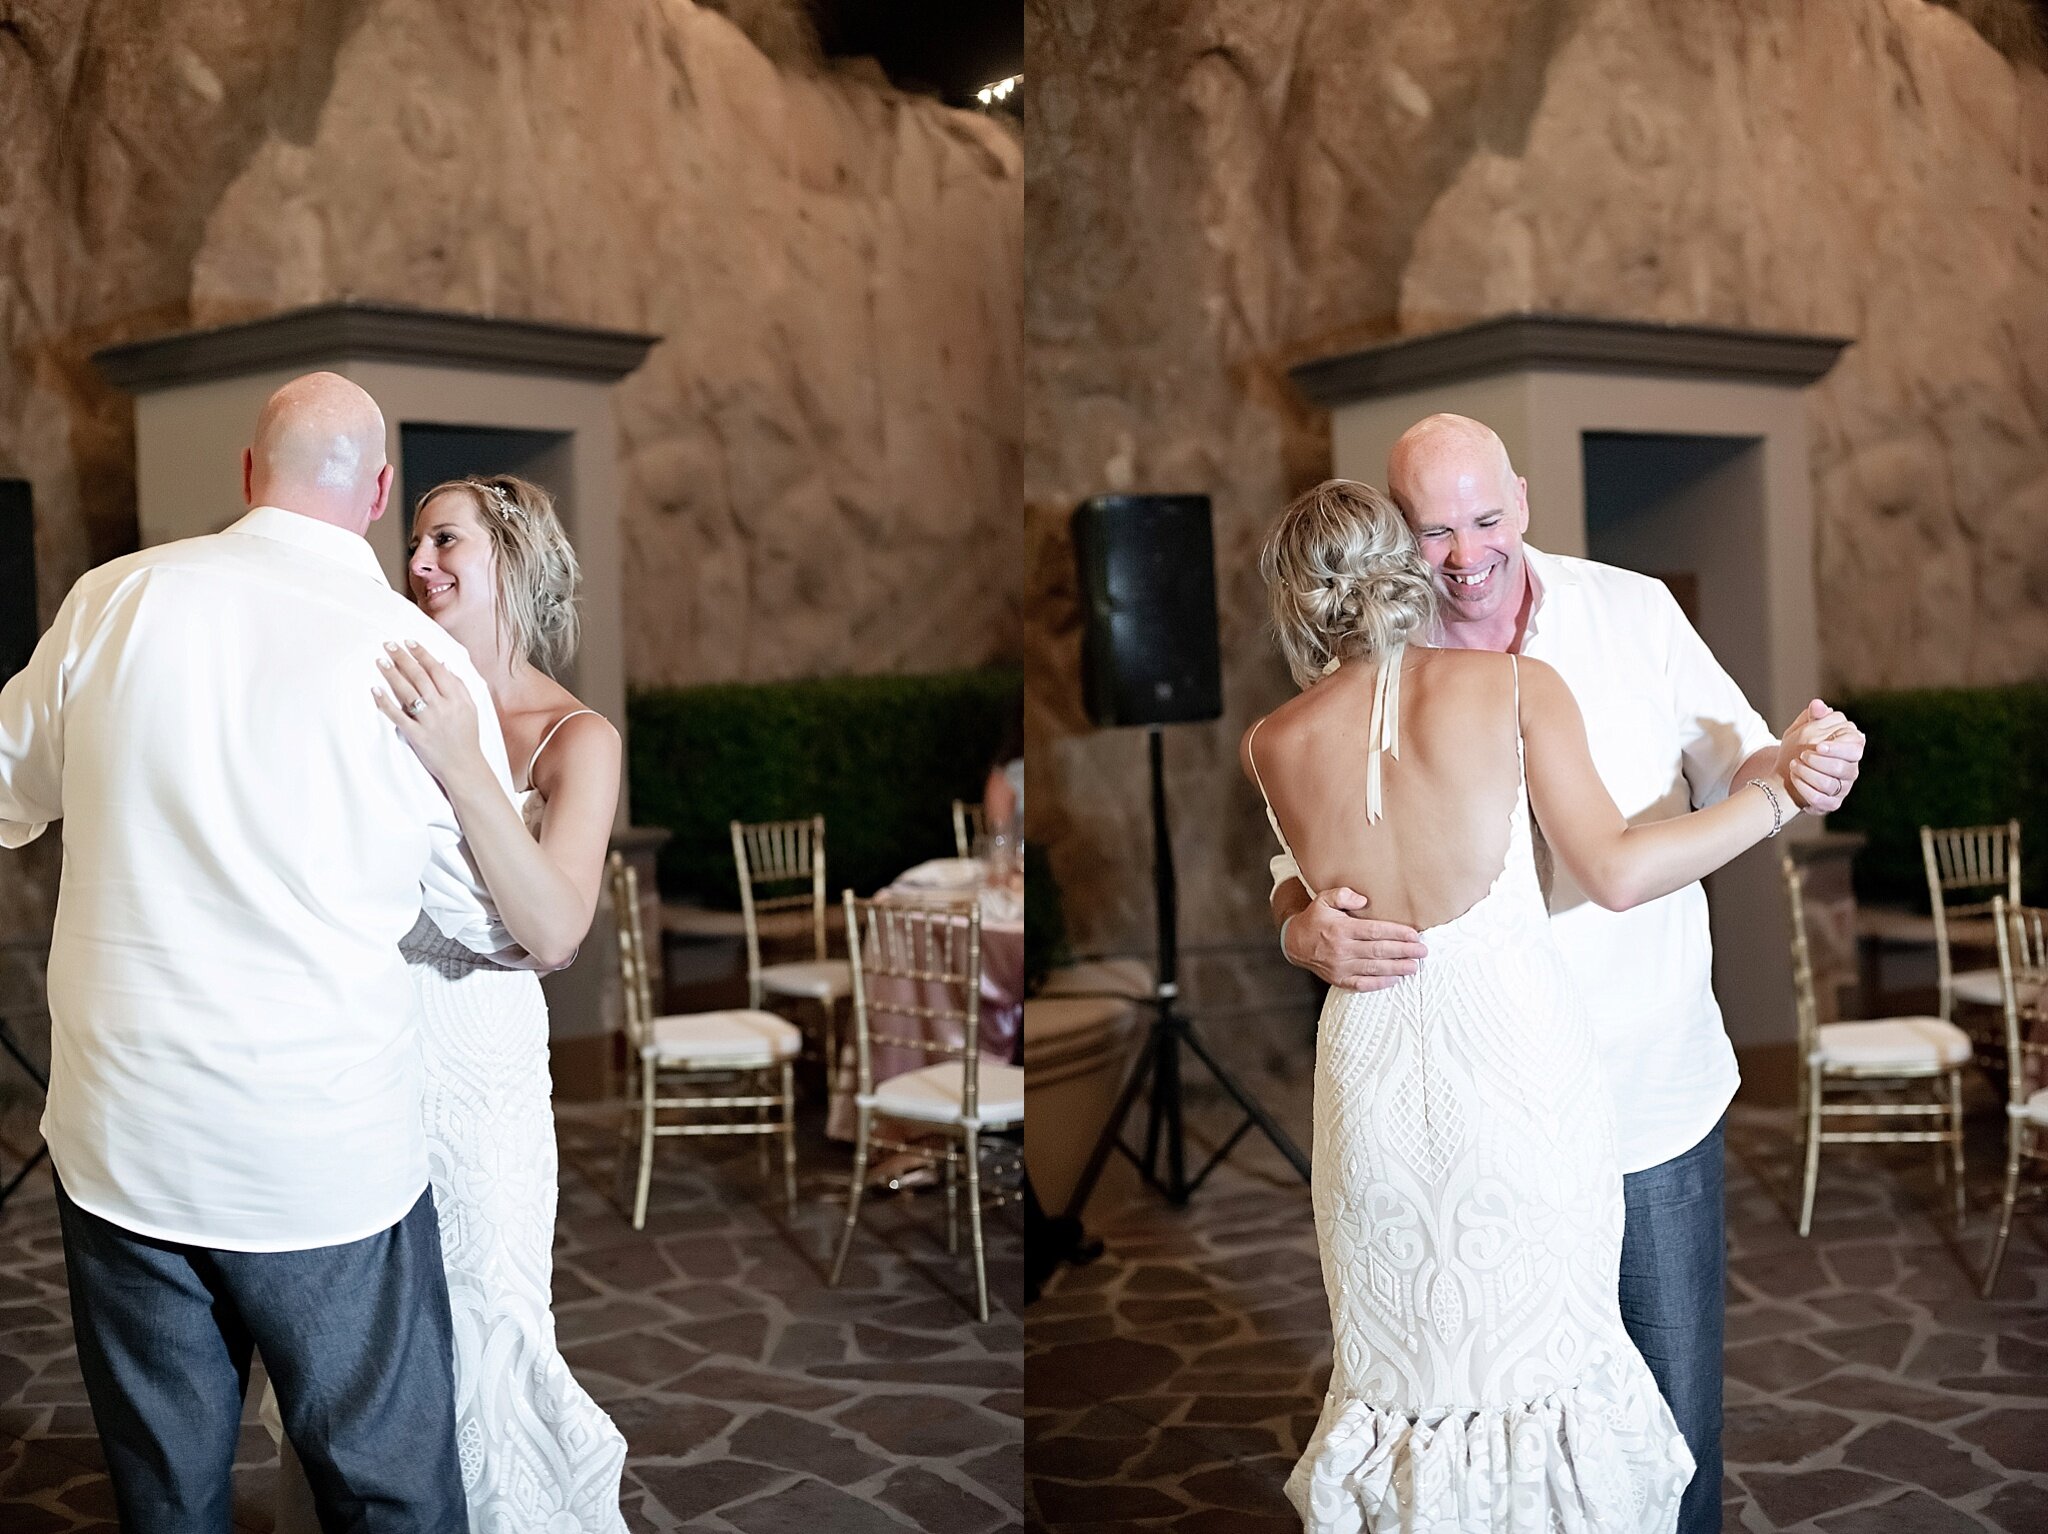 father daughter dance at rooftop poolside wedding reception destination pueblo bonito sunset beach mexico